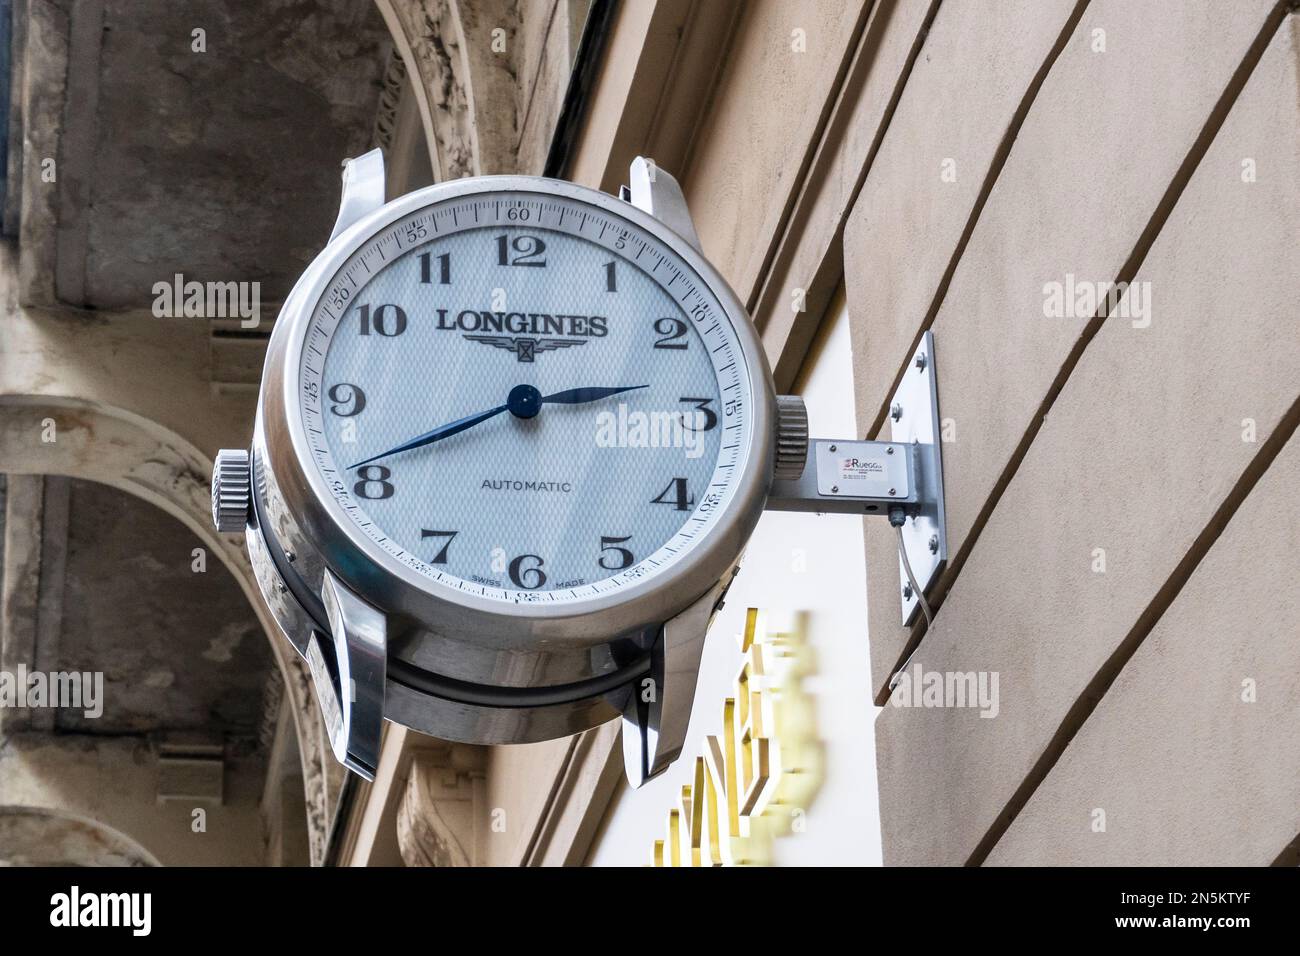 Wall mounted copy watch advertising Longines watches and time pieces, Prague Stock Photo